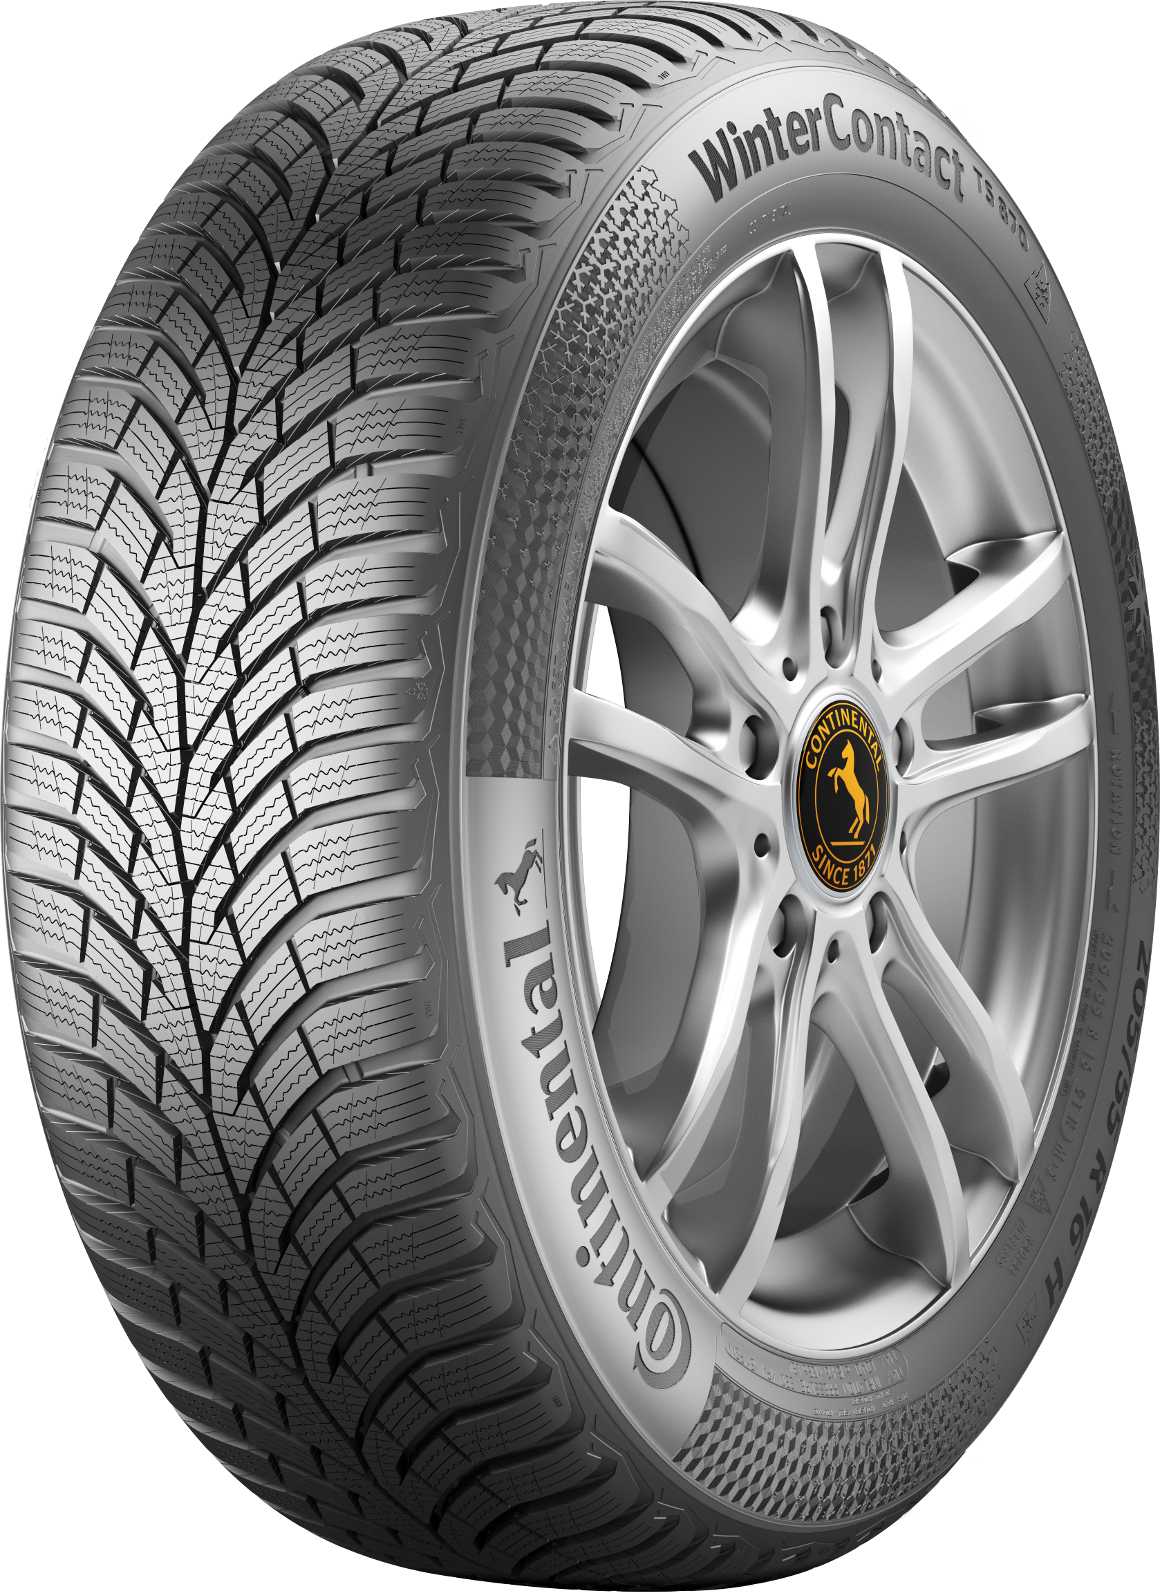    Continental Winter Contact TS870 195/65 R16 